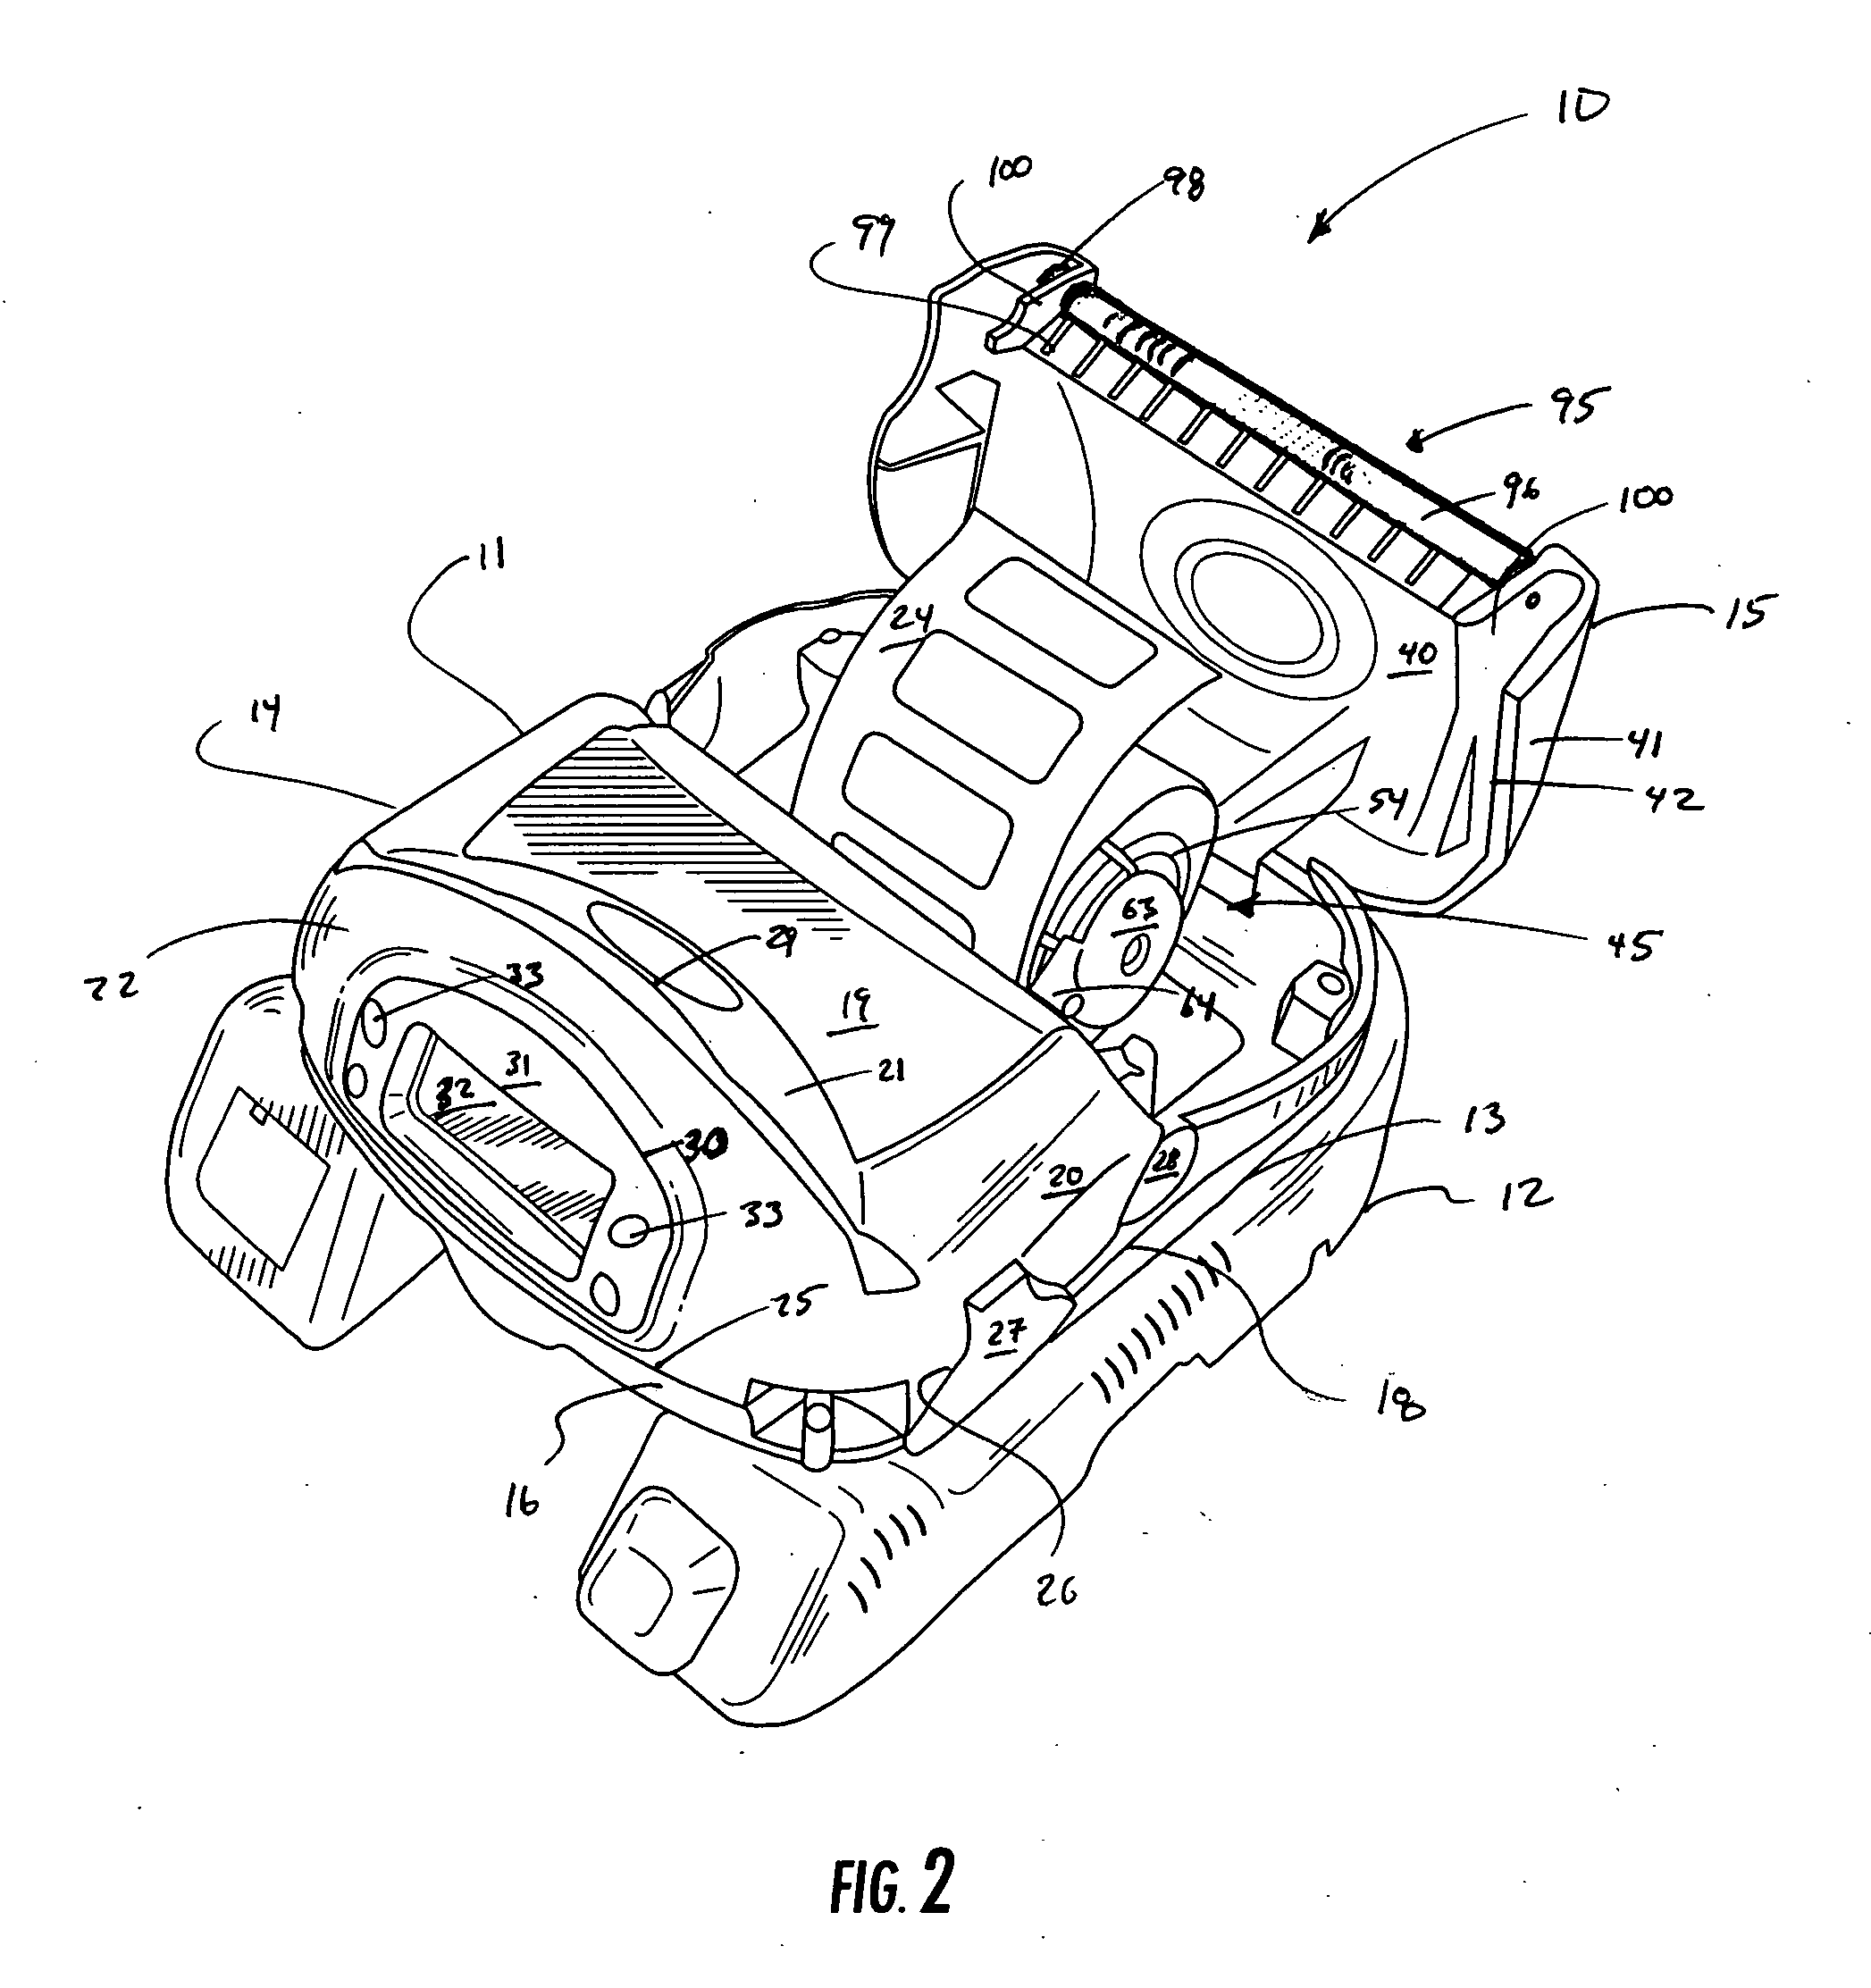 Printer assembly and method of using the same